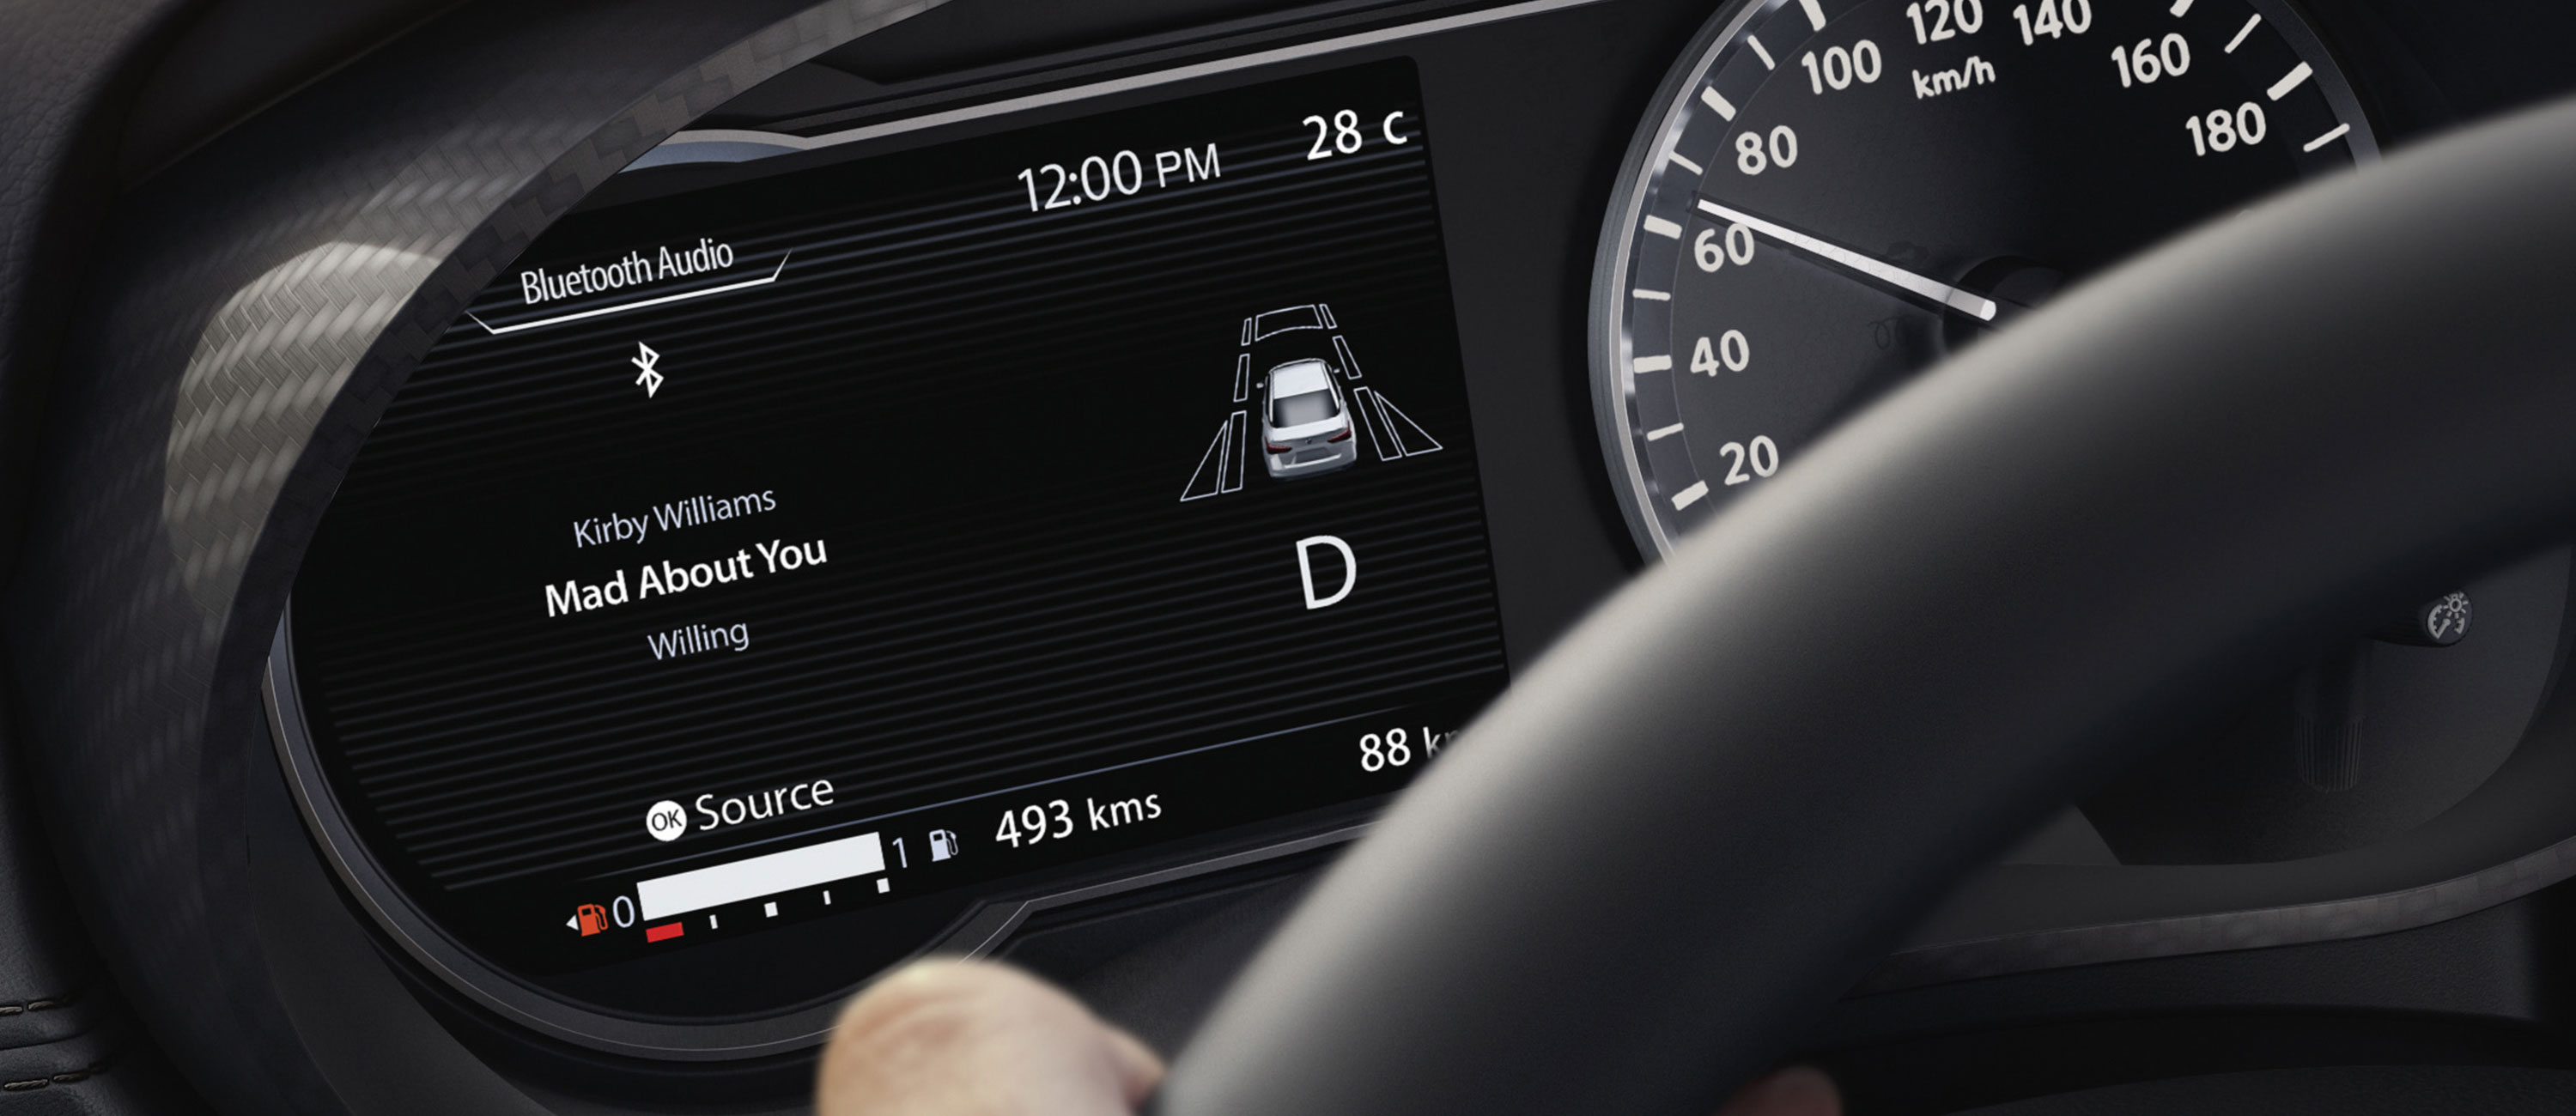 Nissan SUNNY Advanced Drive Assist Display showing music screen